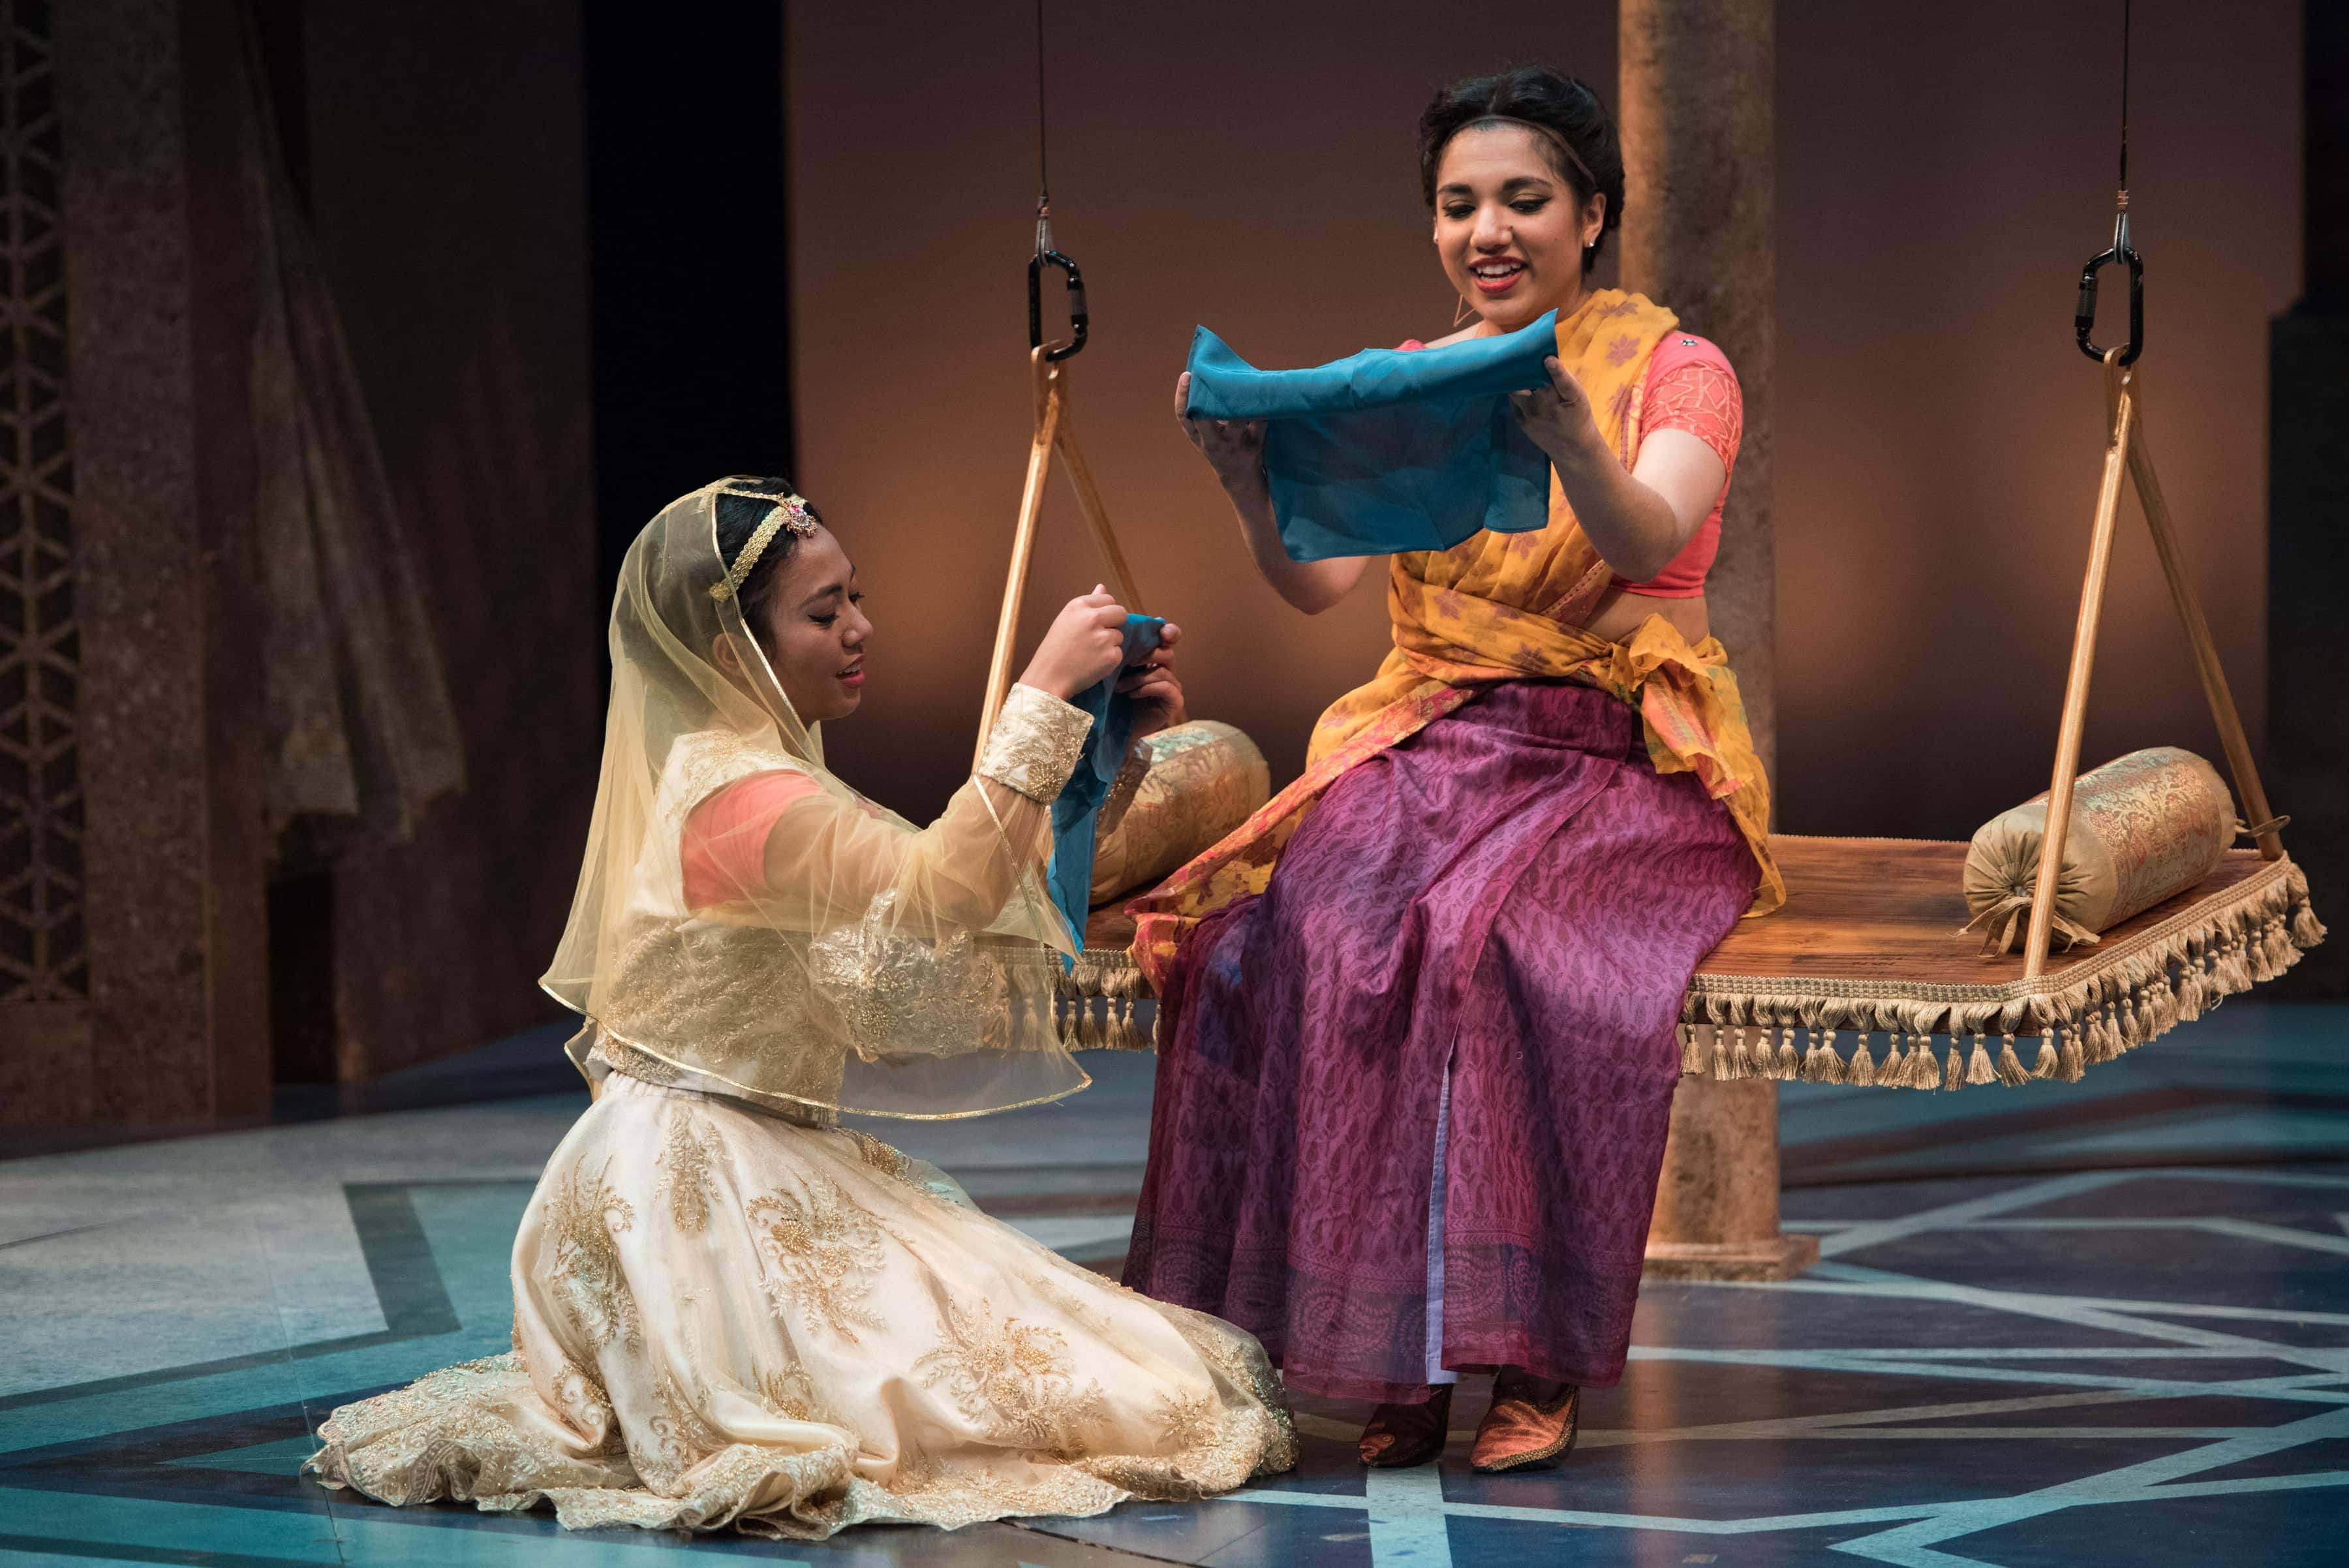 Having switched clothes, Princess Razia and Rani exchange scarves. (L-R: Alexandra Palting, Anjna Swaminathan). Photo by Margot Schulman. 